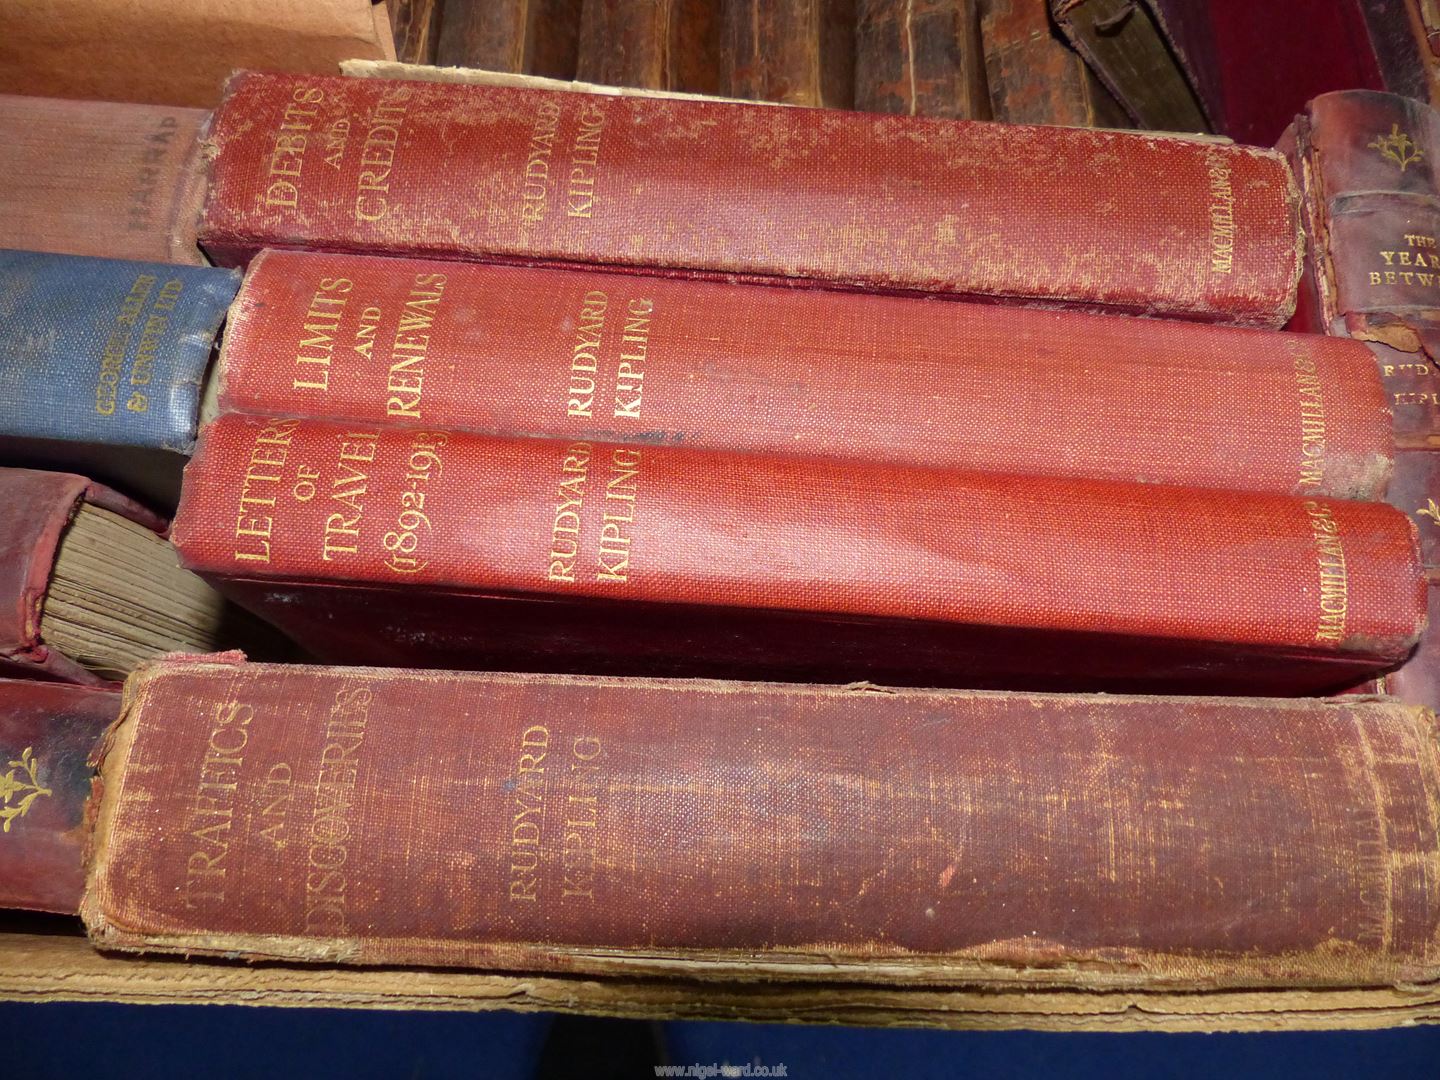 A quantity of Rudyard Kipling novels,The Ancient History By Mr Rollin 8 volumes, - Image 5 of 6